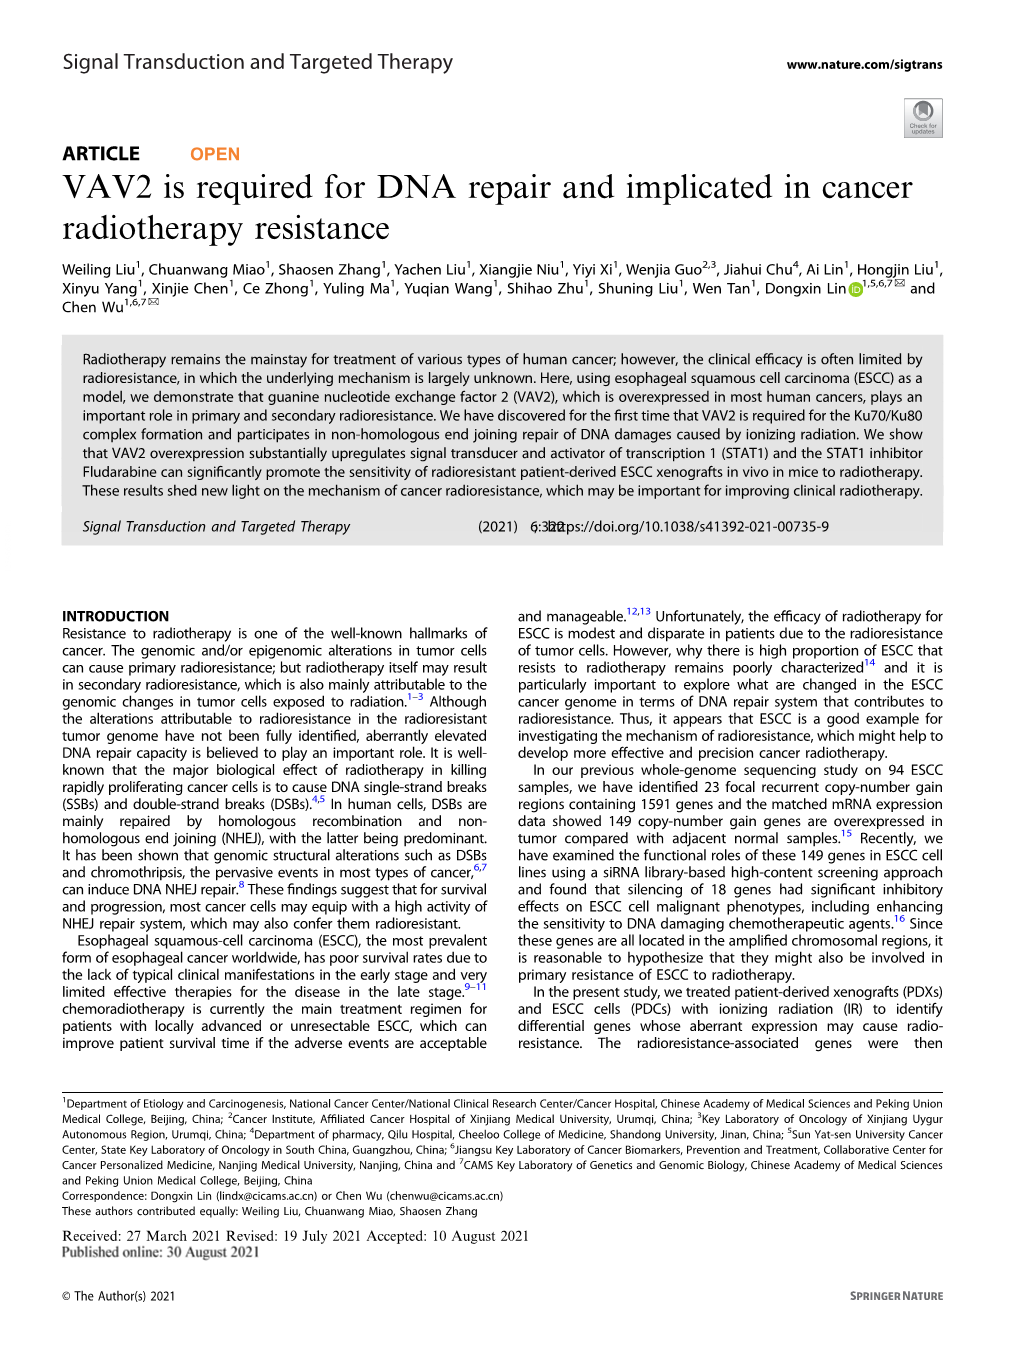 VAV2 Is Required for DNA Repair and Implicated in Cancer Radiotherapy Resistance